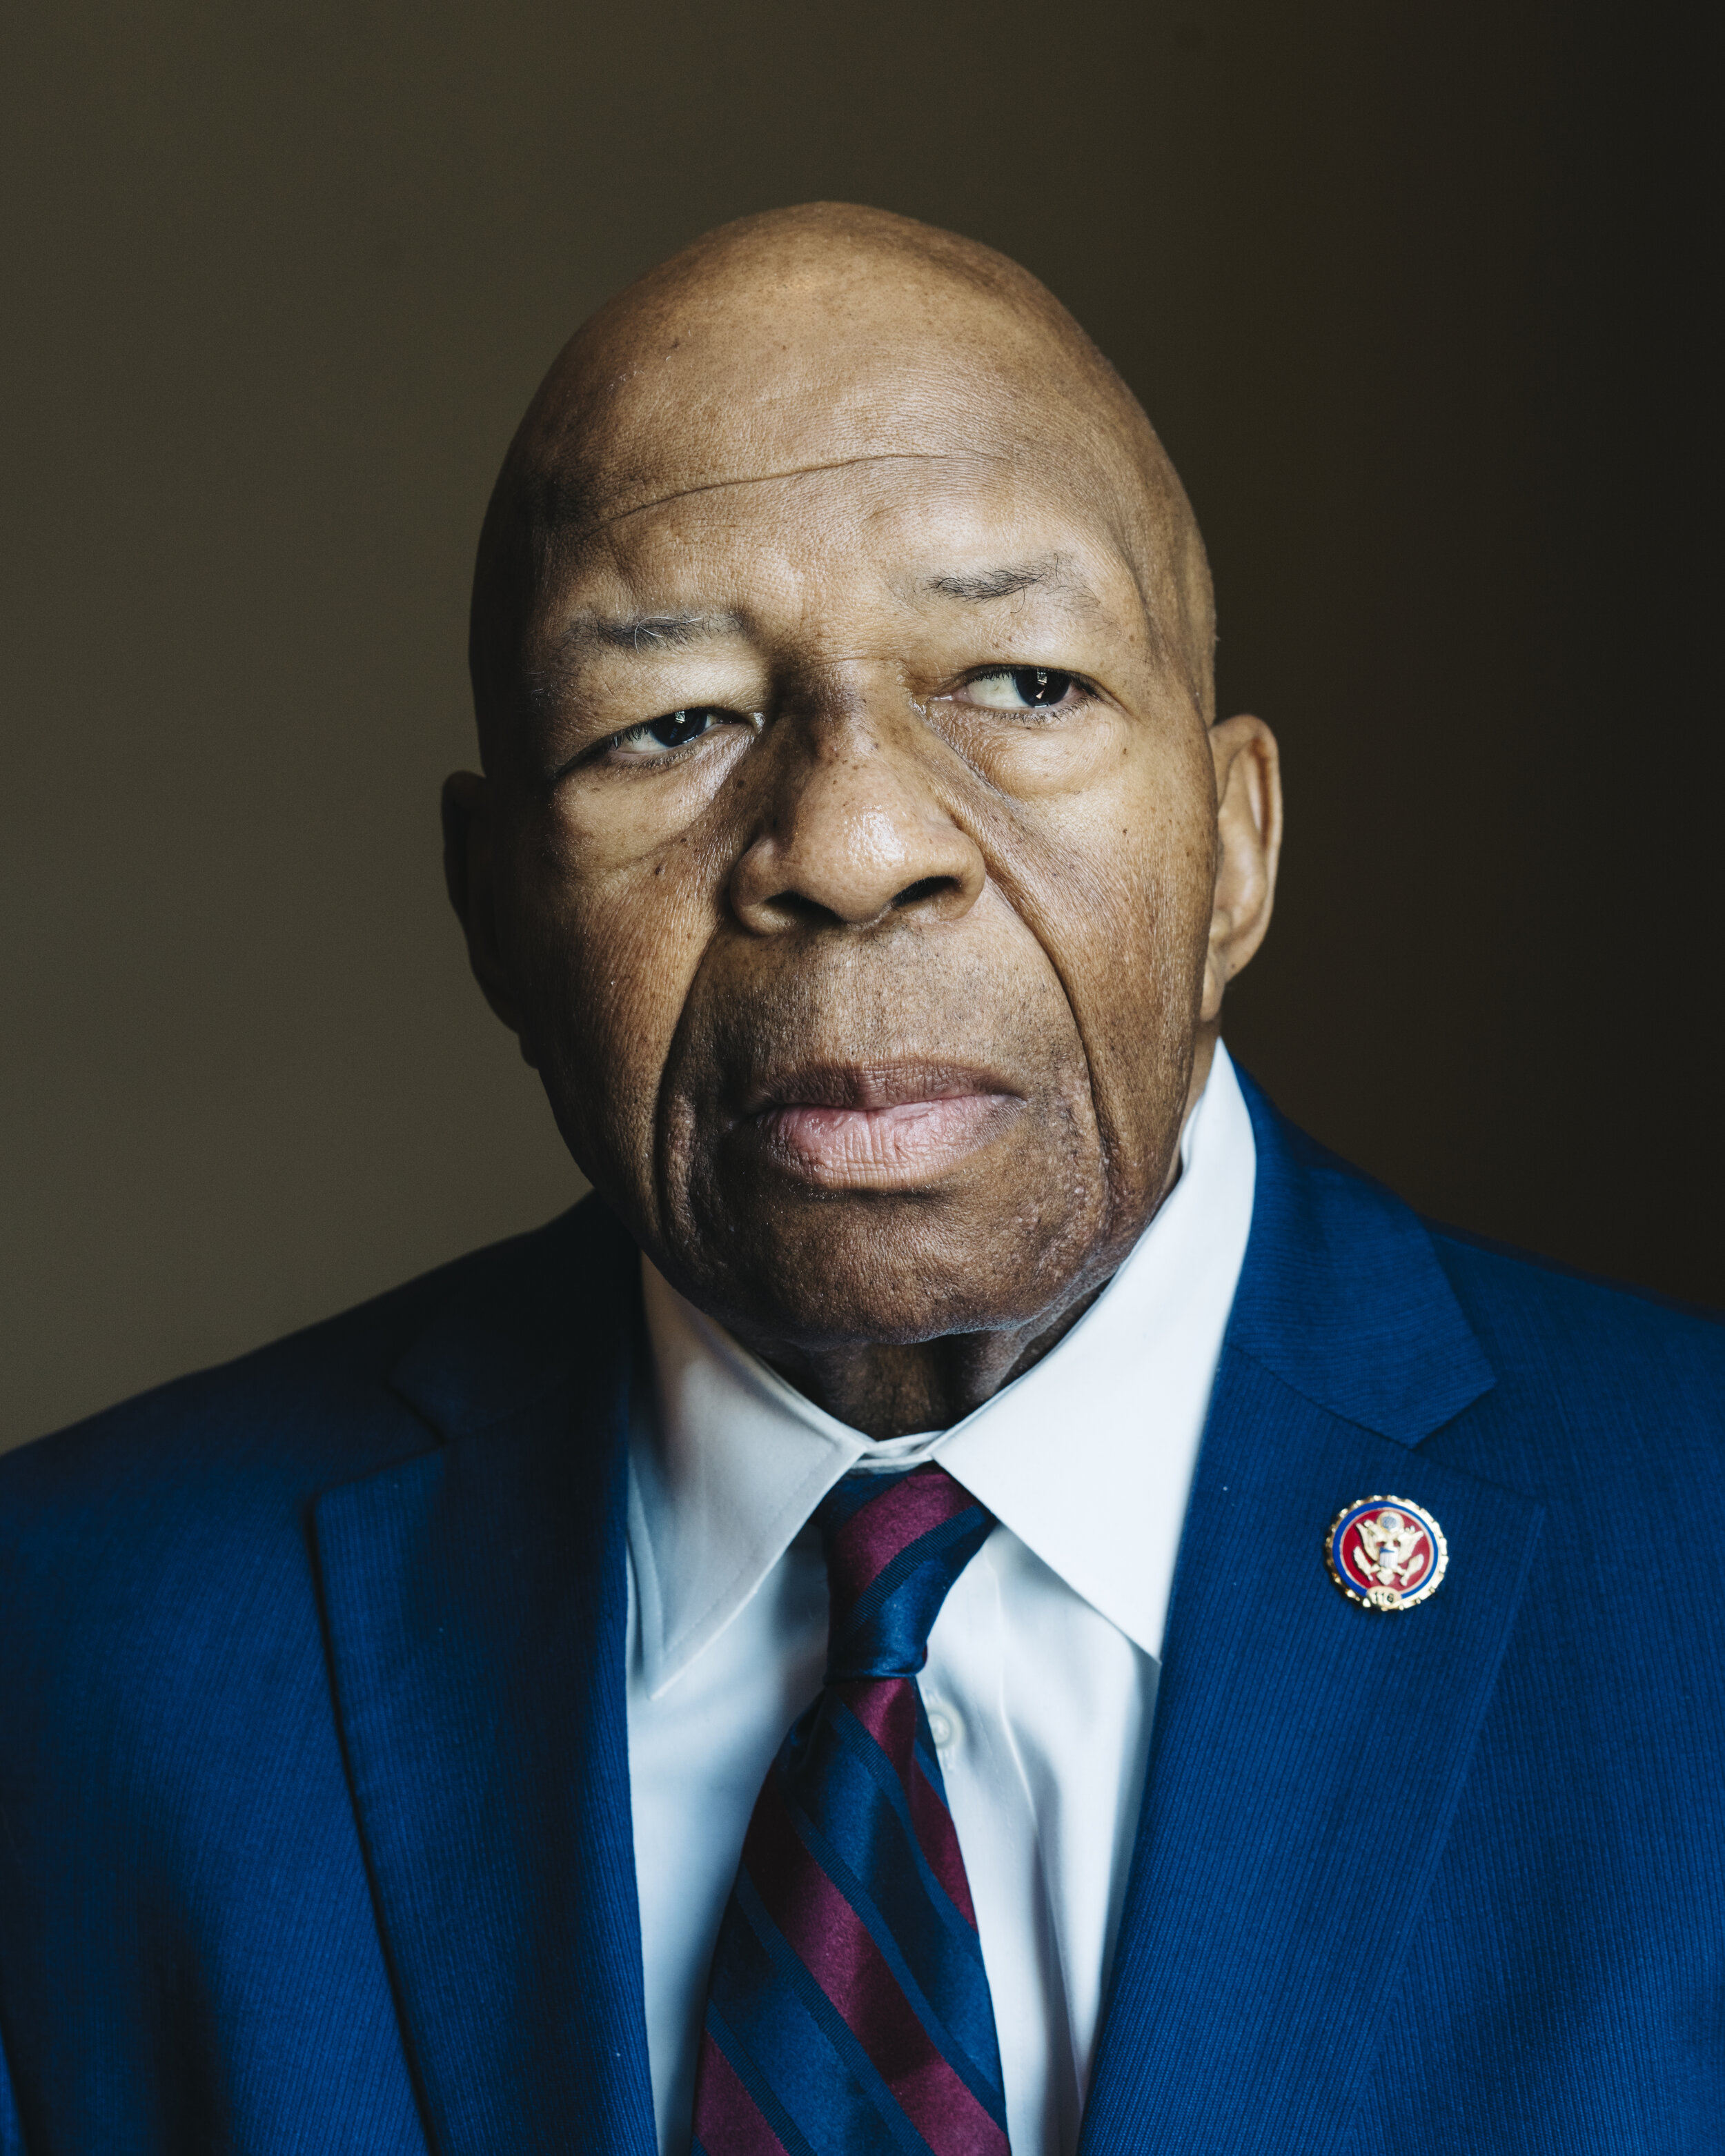  Assignment ID: 30233548A

May 2nd, 2019 - Washington, D.C.

Maryland Congressman Elijah Cummings in the House Oversight Committee room in the Rayburn House office building in Washington, D.C. 

Justin T. Gellerson for The New York Times             